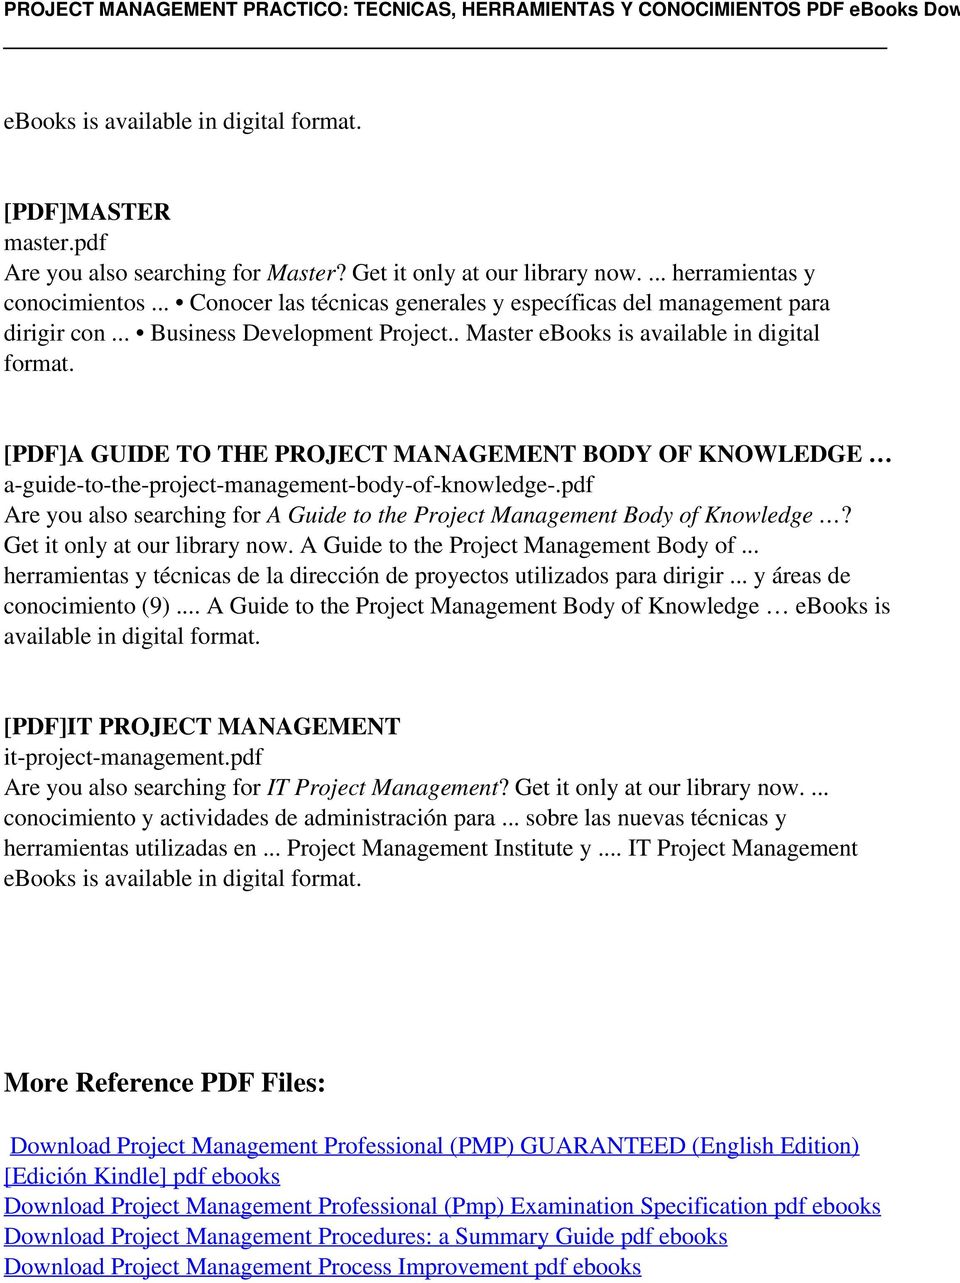 . Master ebooks is available in digital [PDF]A GUIDE TO THE PROJECT MANAGEMENT BODY OF KNOWLEDGE a-guide-to-the-project-management-body-of-knowledge-.